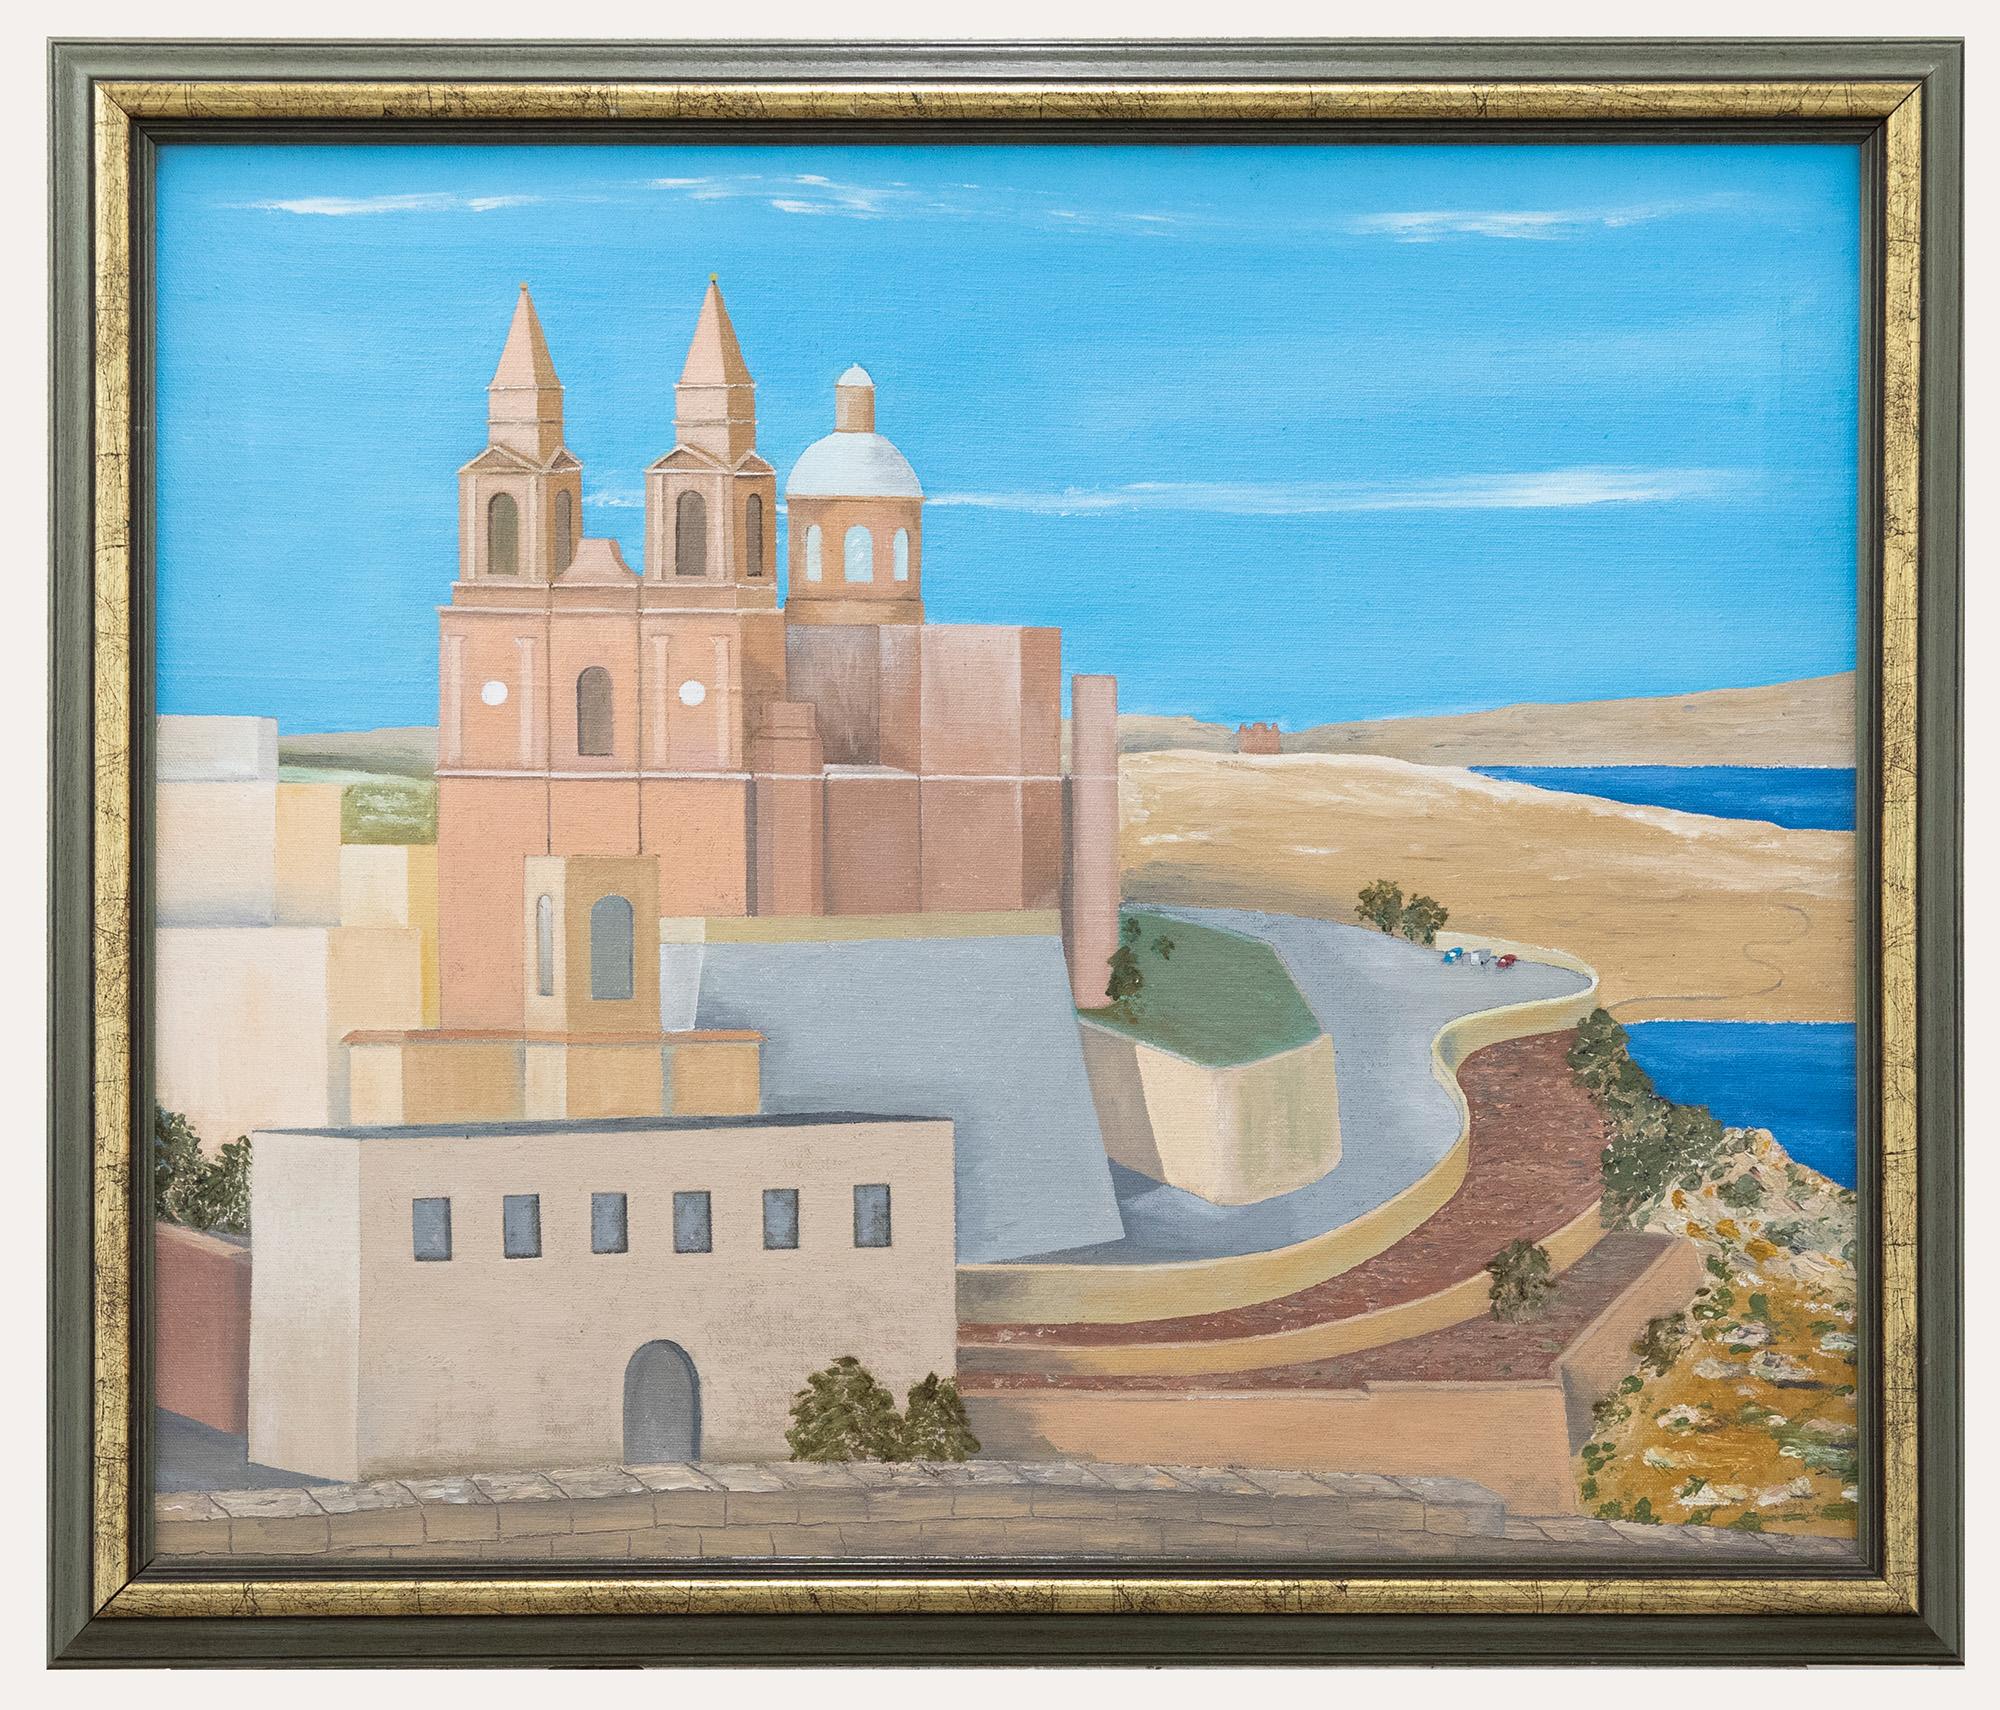 Unknown Landscape Painting - Contemporary Oil - Cathedral in the Dessert